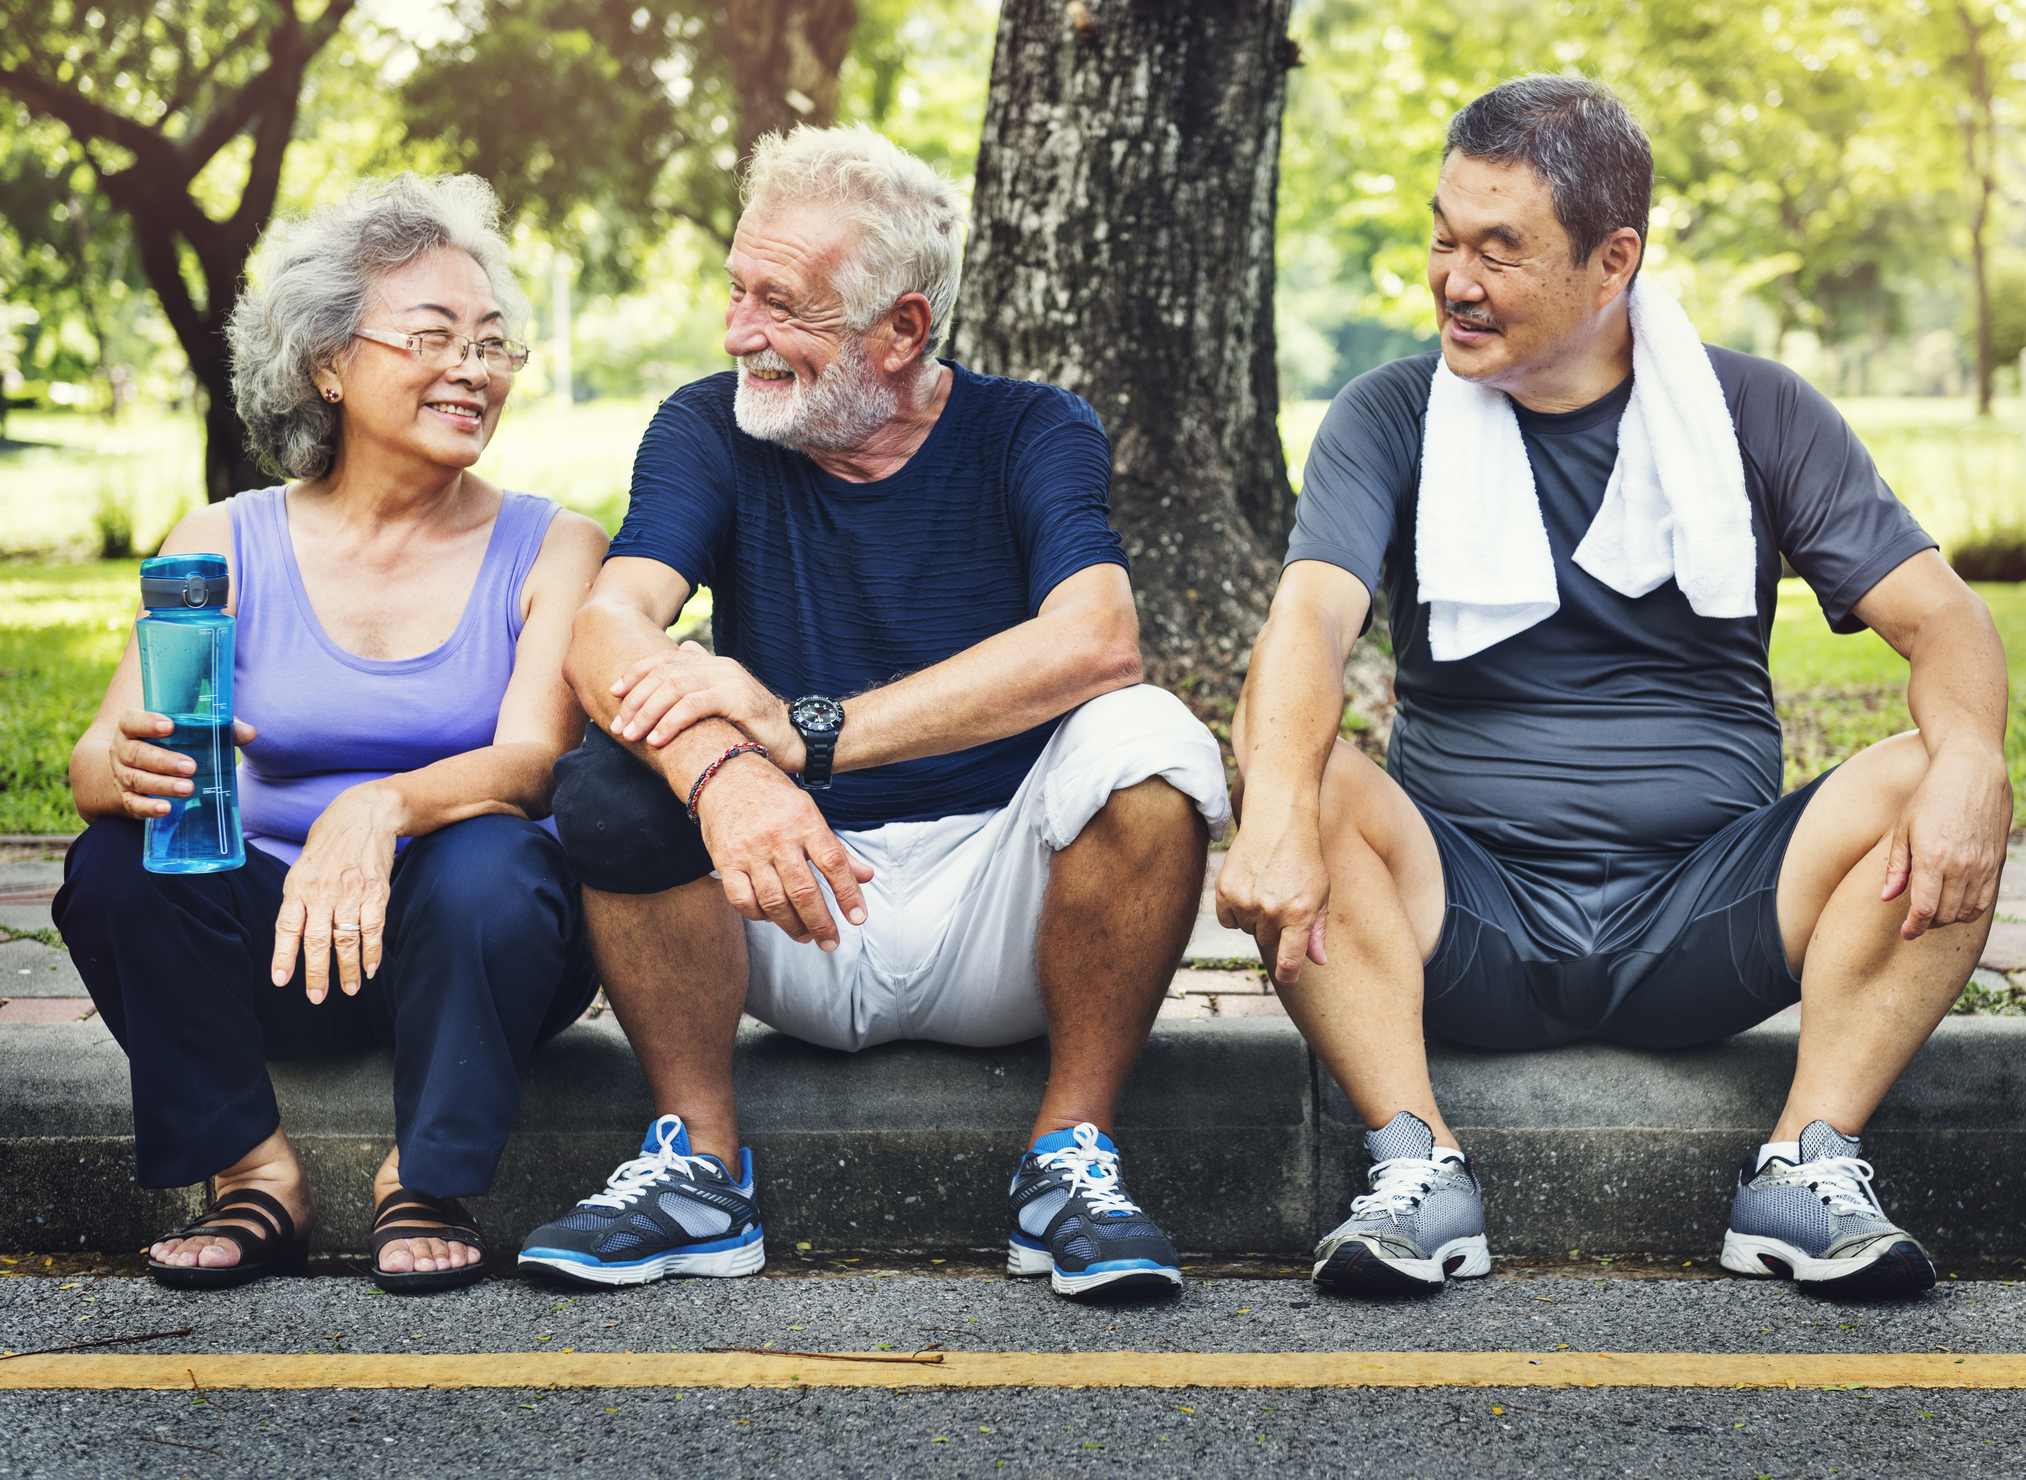 Lifestyle and Longevity: What Research Tells Us